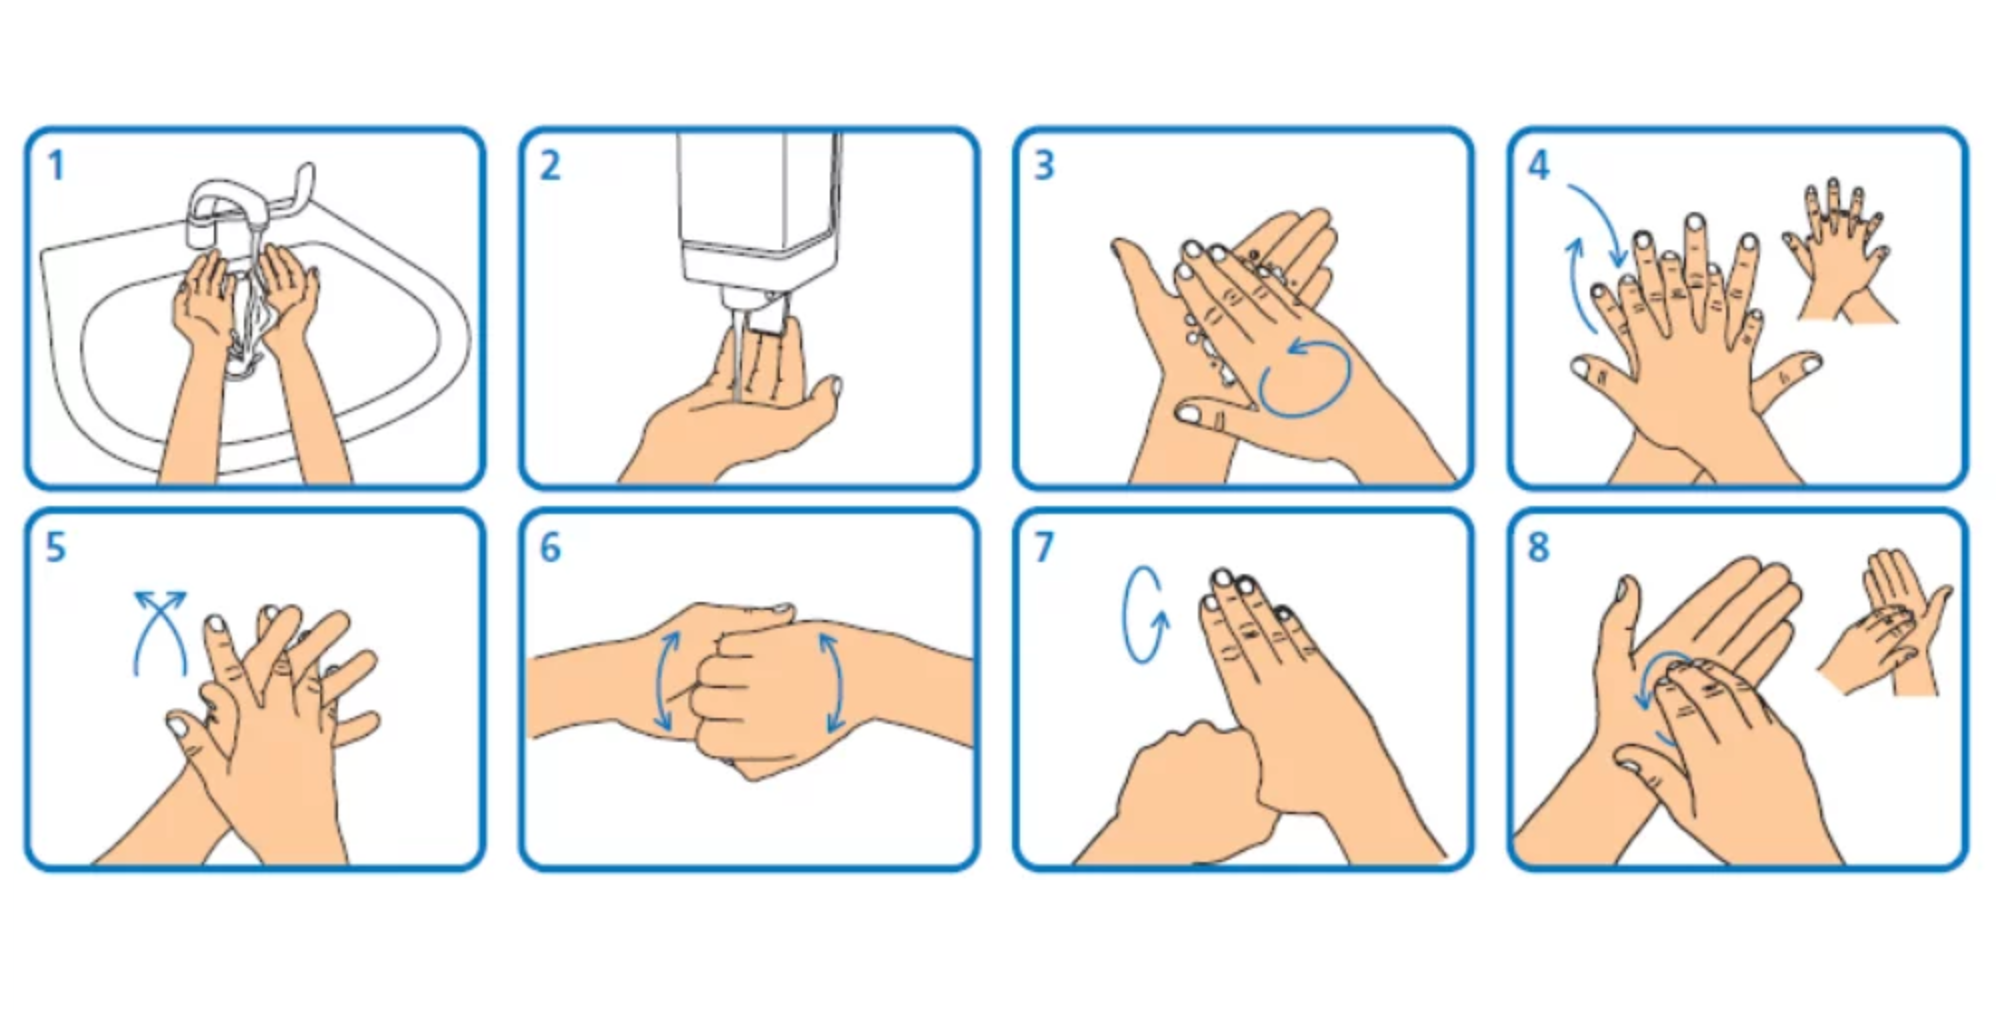 washing-hands-tips